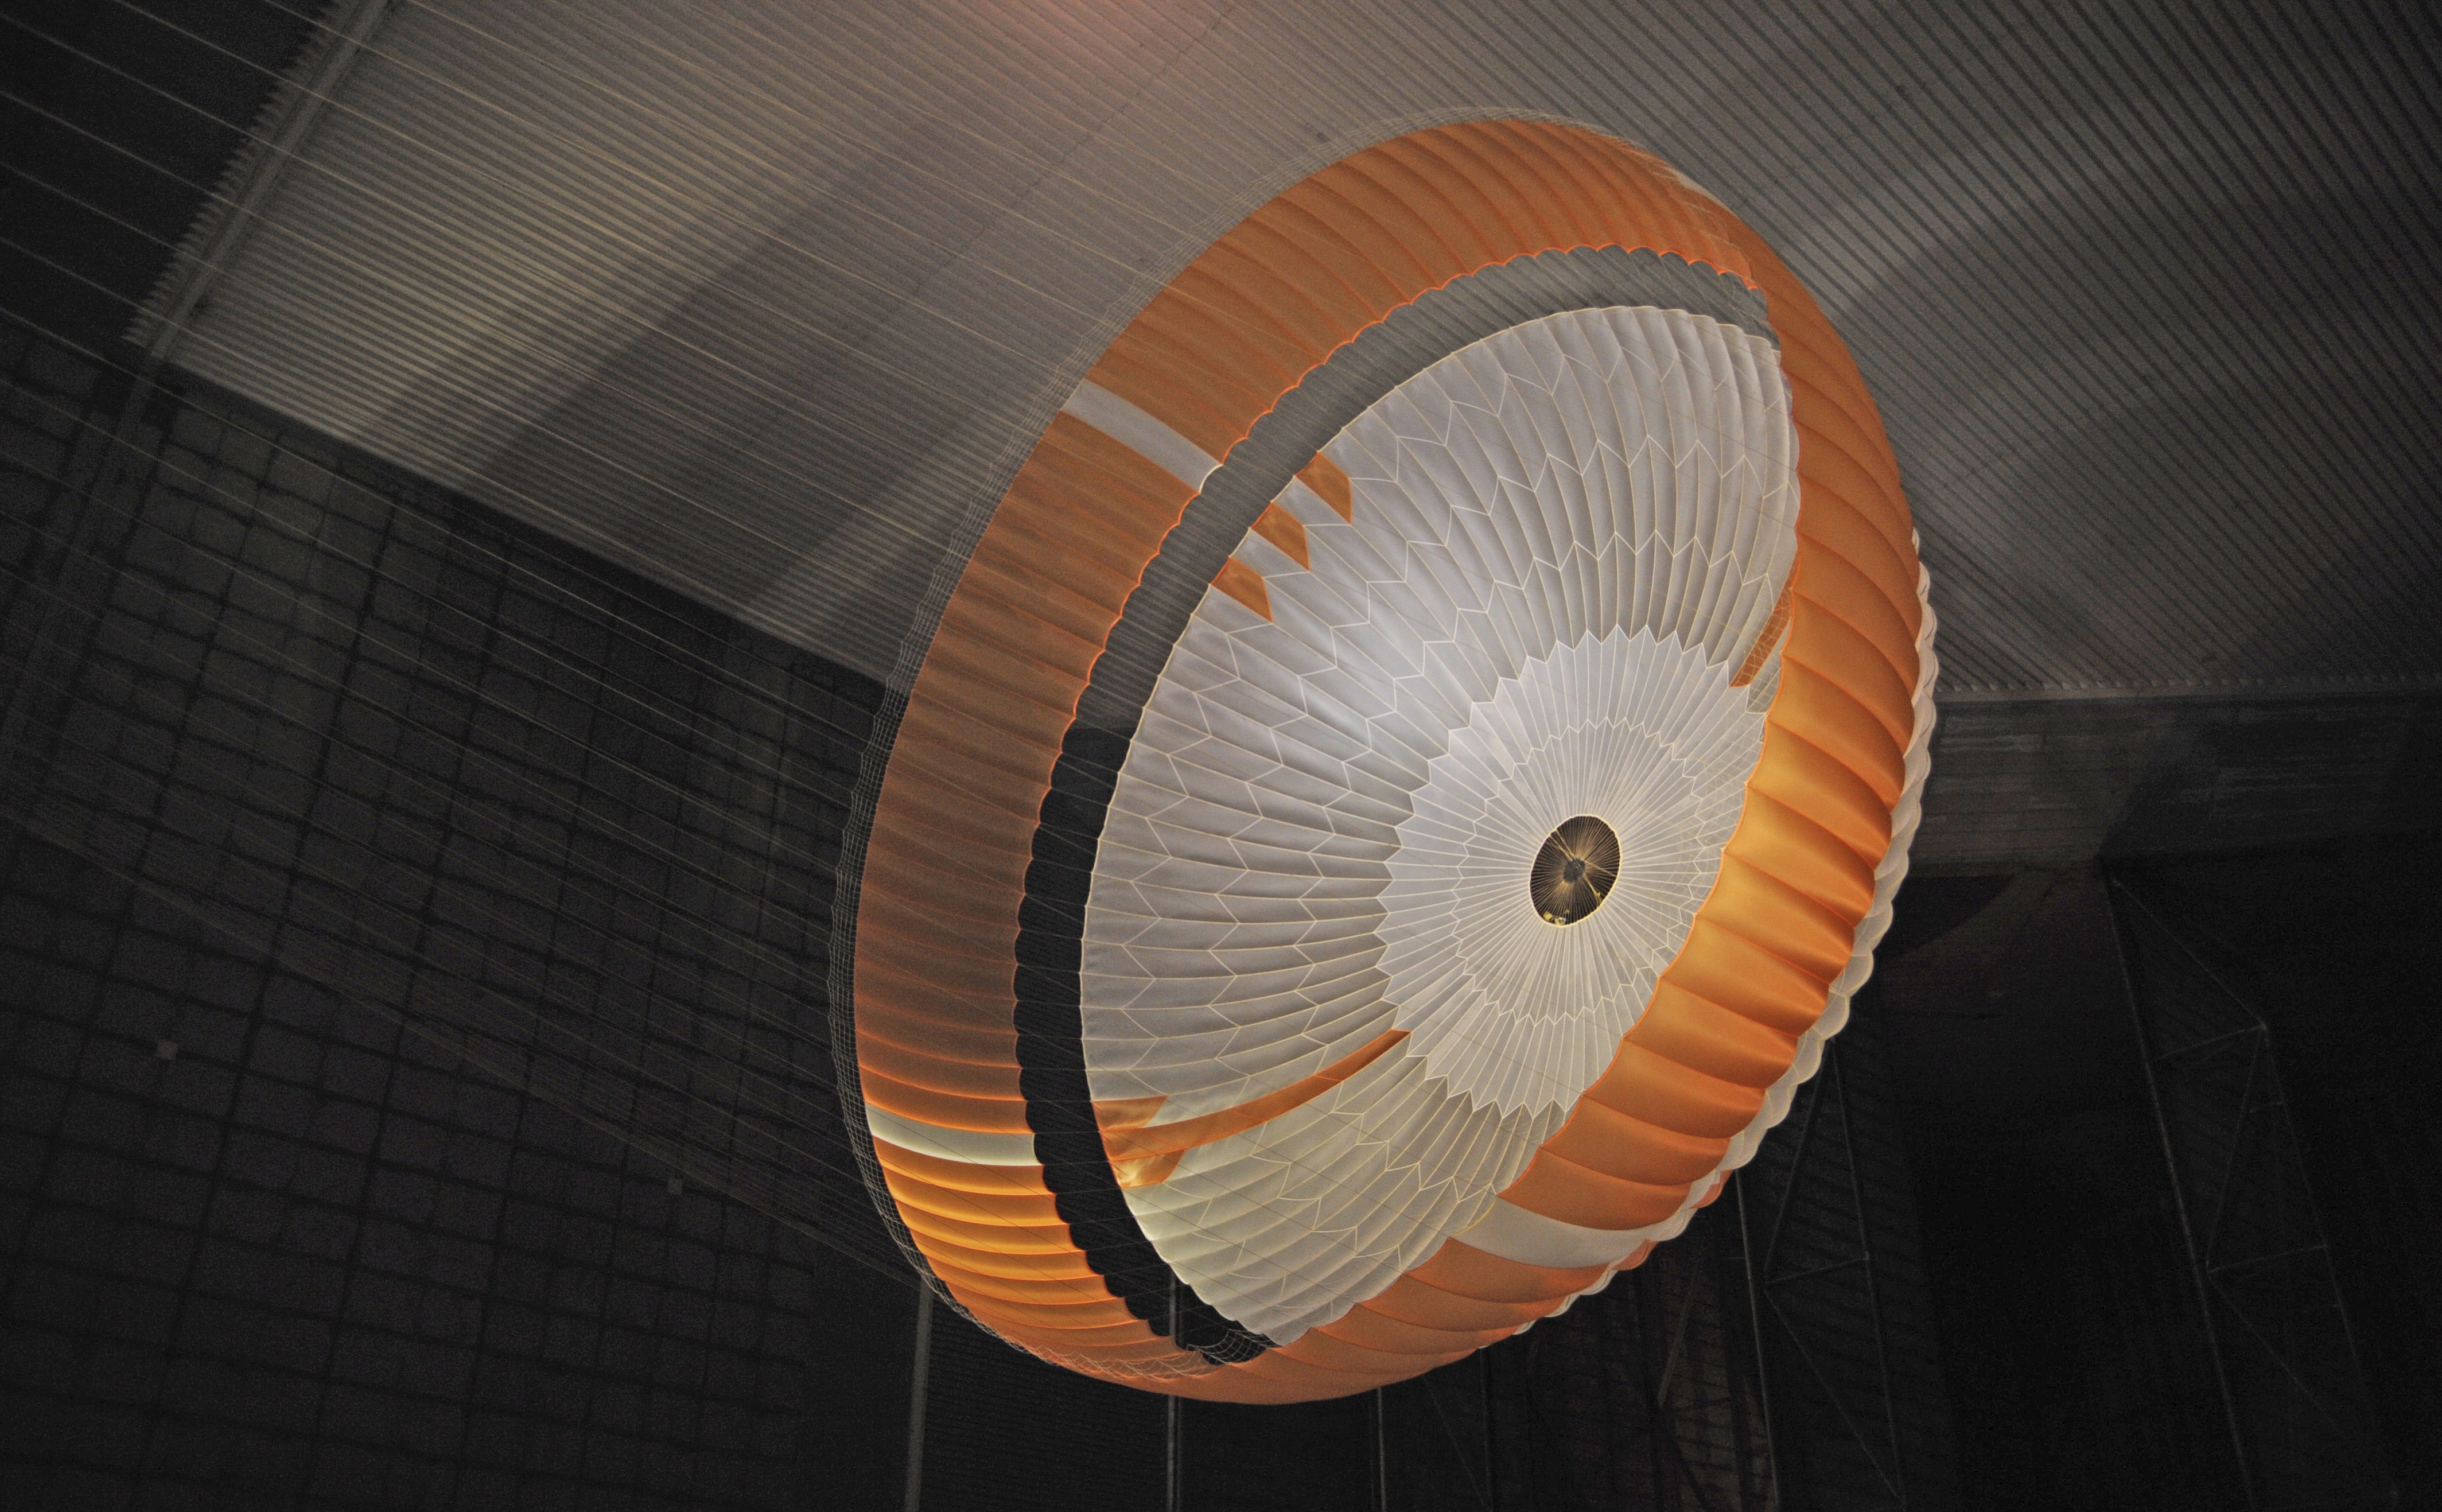 Open Parachute During Tests for Mars Science Laboratory